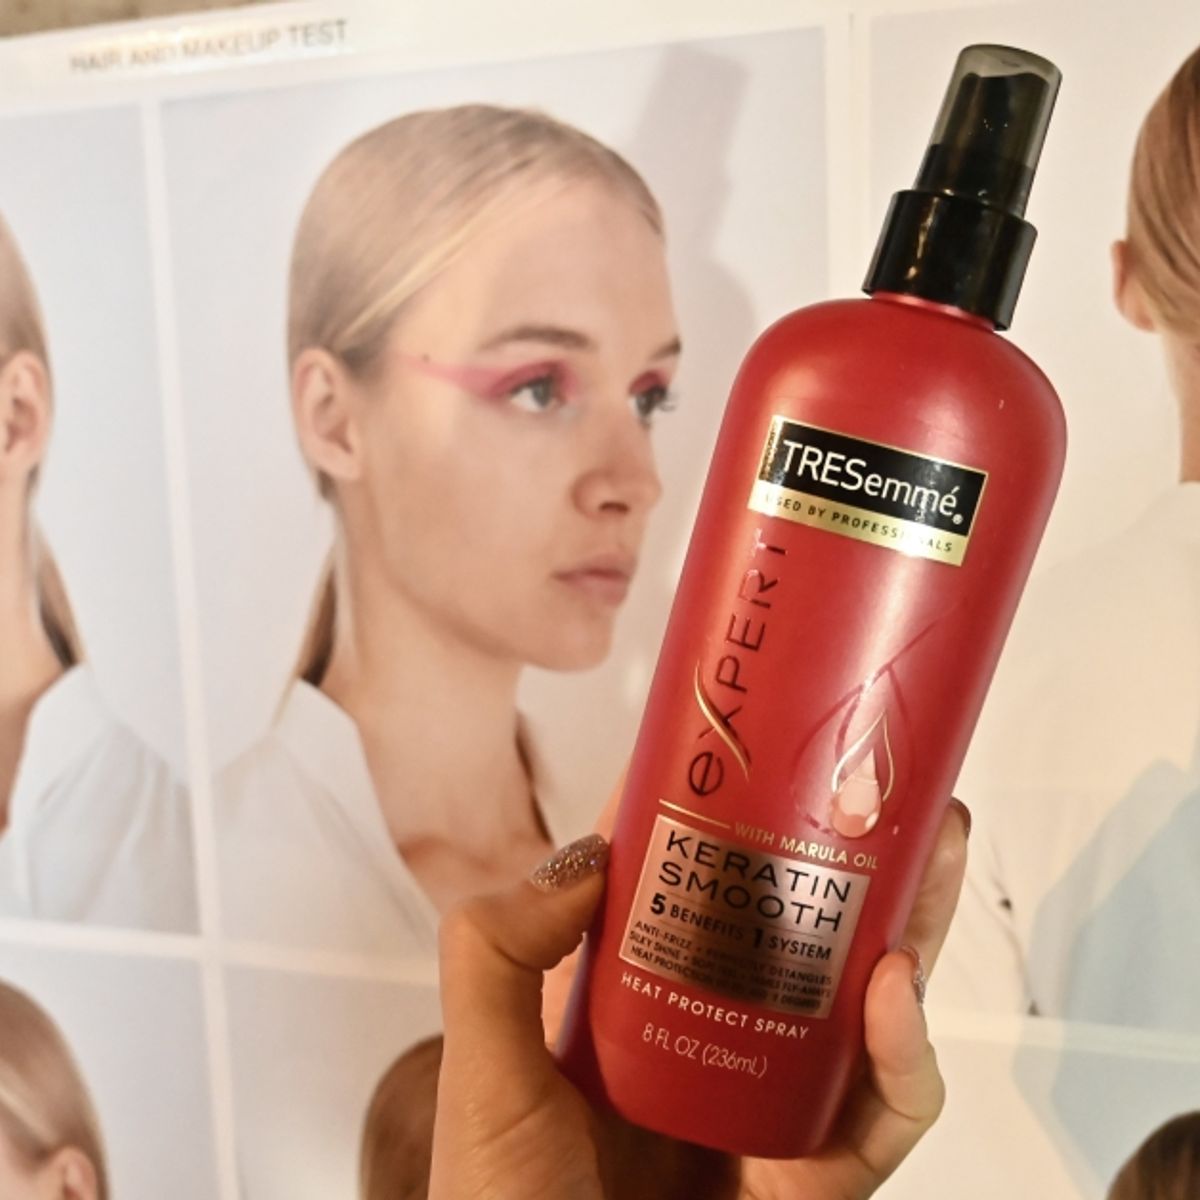 Did Consumers Sue Over Alleged Hair Loss Ingredient in TRESemmé Shampoo? |  